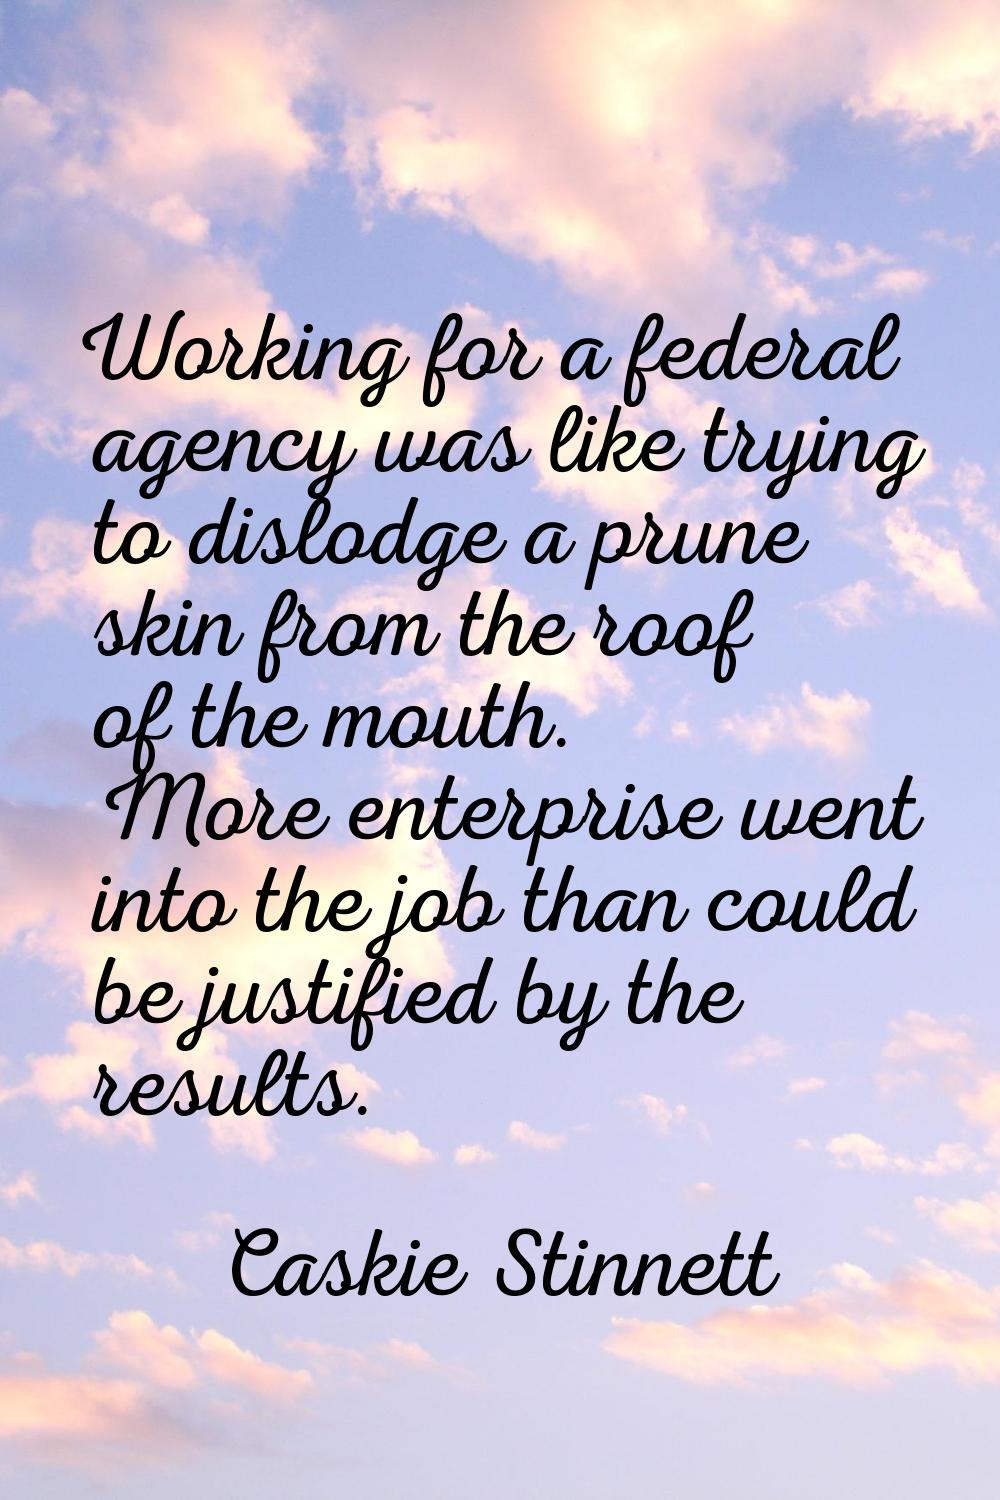 Working for a federal agency was like trying to dislodge a prune skin from the roof of the mouth. M